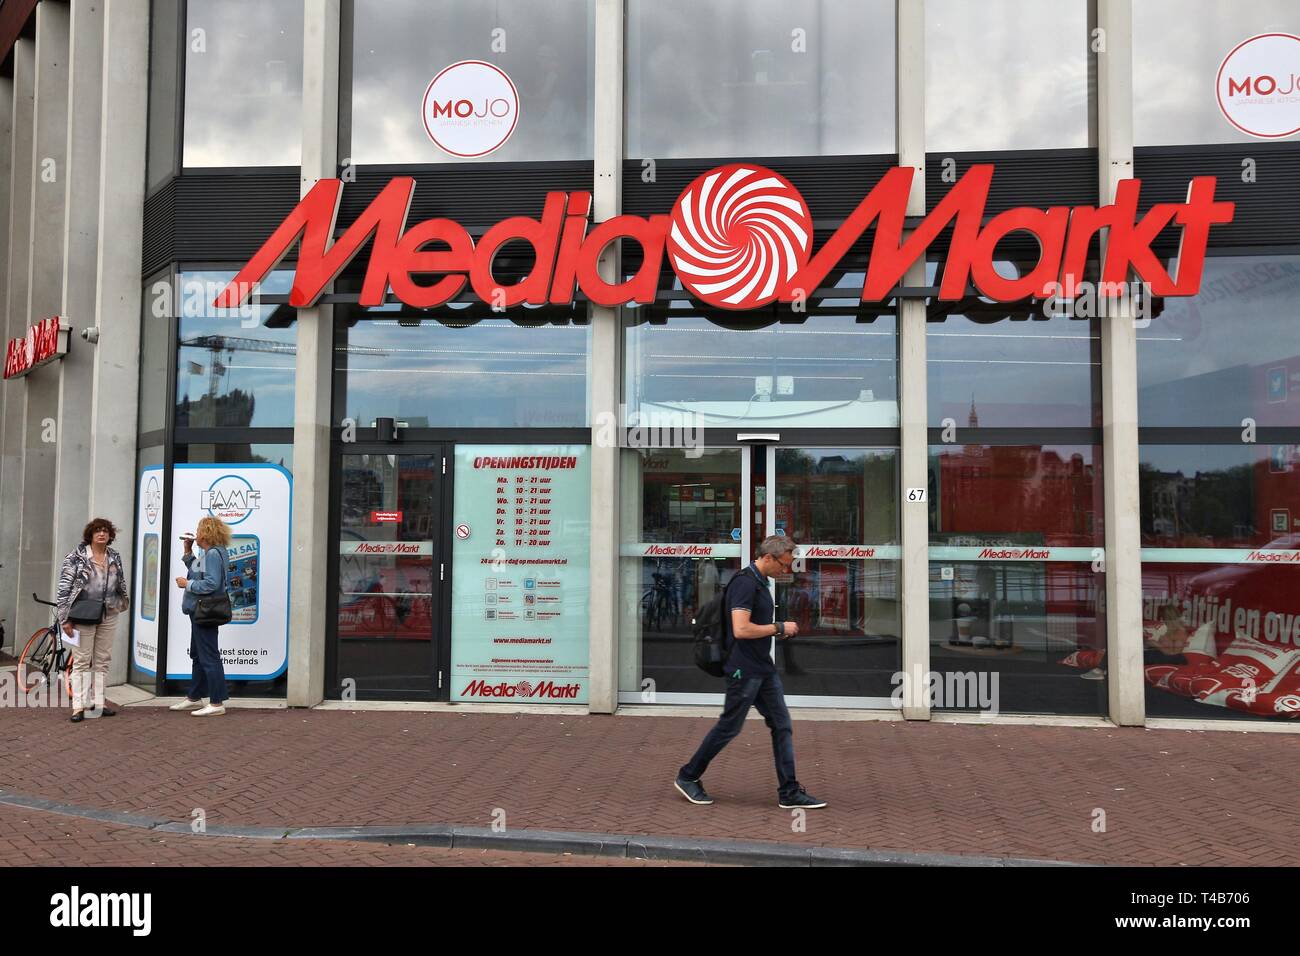 AMSTERDAM, NETHERLANDS 8, 2017: People walk by Media Markt store in Amsterdam. Media is the largest consumer electronics store chain in E Stock Photo - Alamy